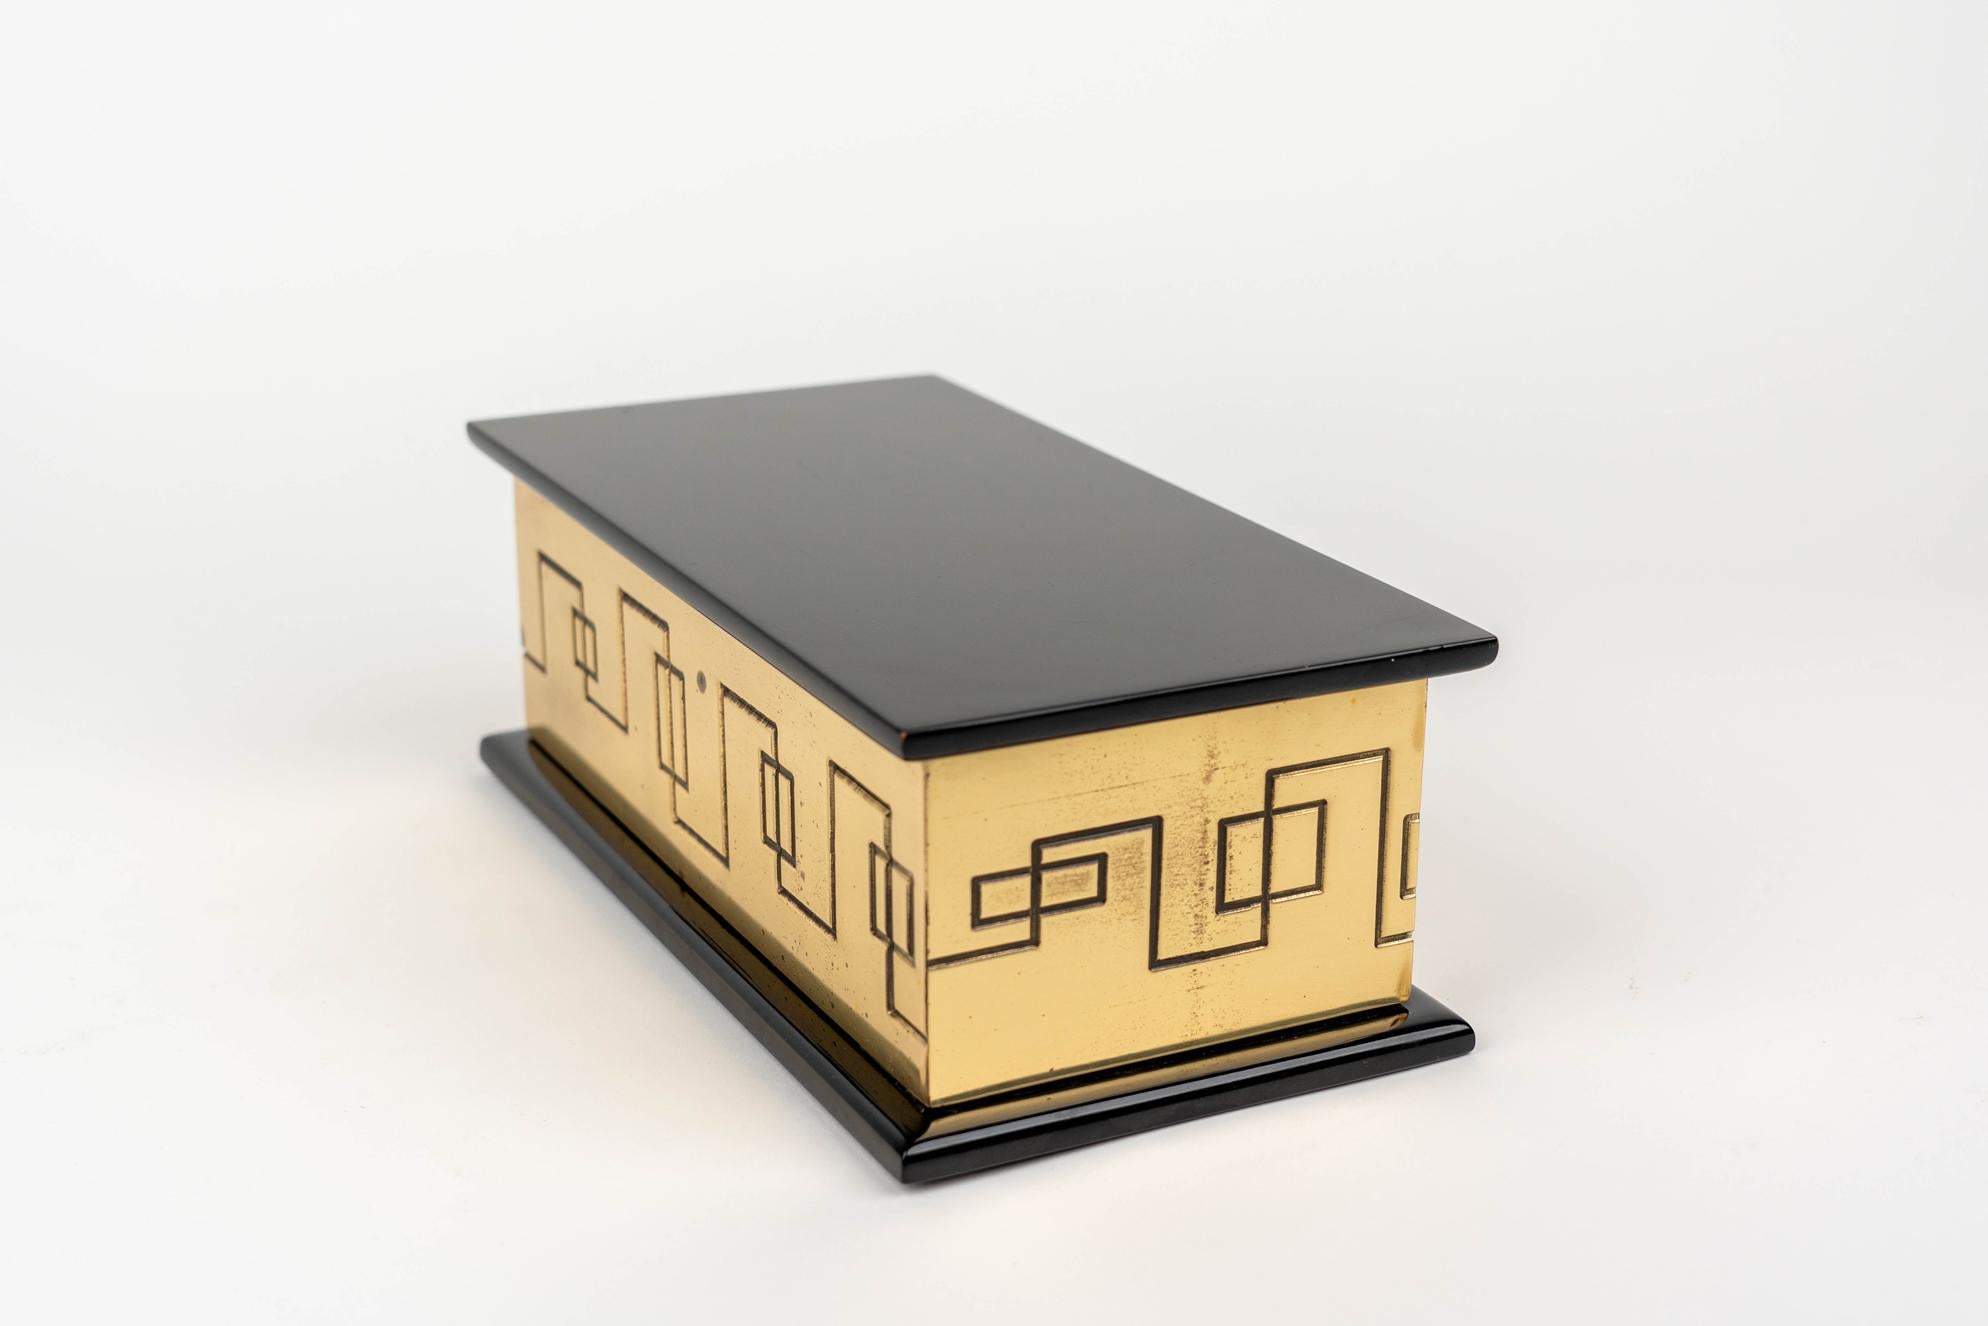 Italian Rectangular Decorative Box in Solid Brass and Lacquered Wood, Italy 1970s For Sale